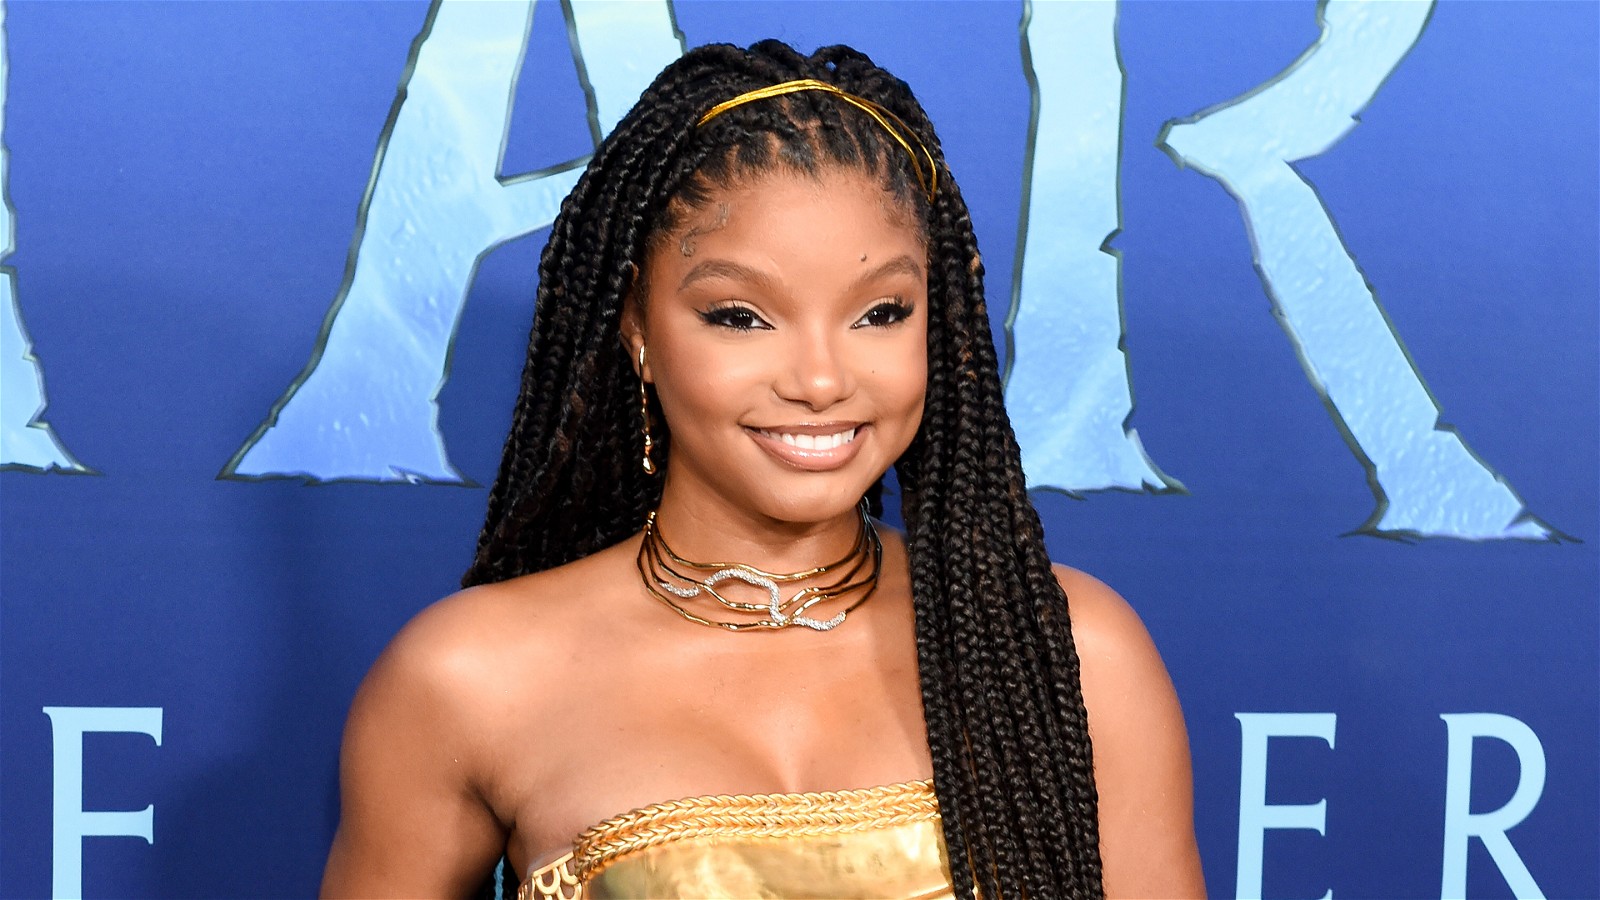 Halle Bailey trained ruthlessly for The Little Mermaid